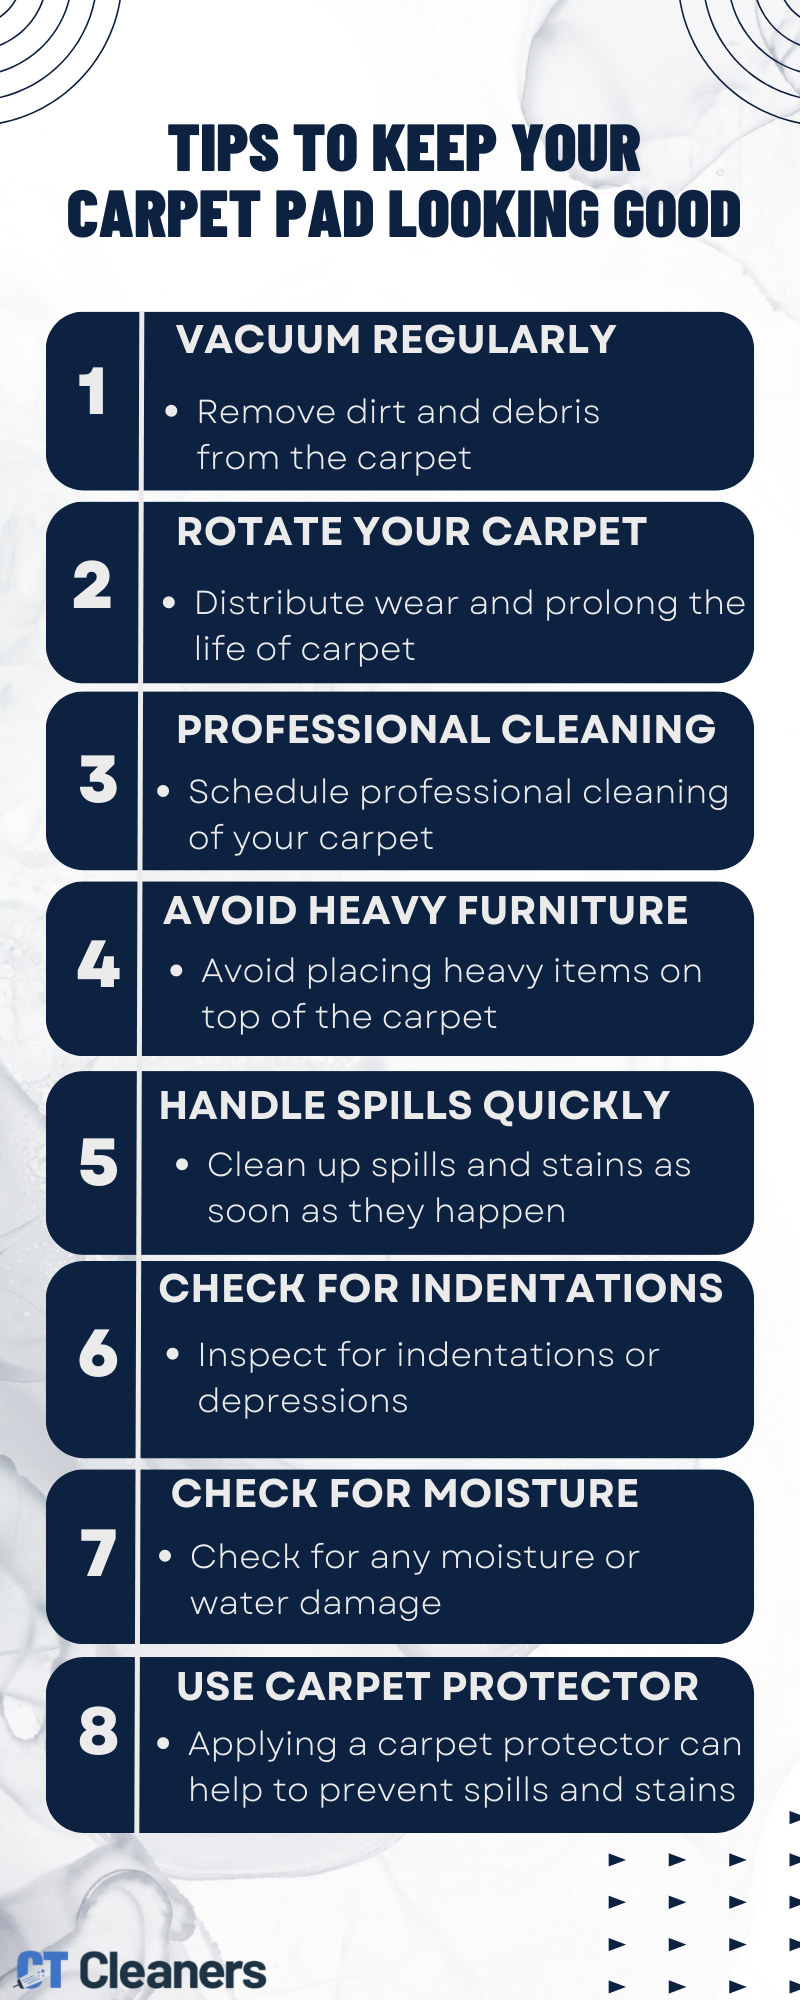 Tips to Keep Your Carpet Pad Looking Good